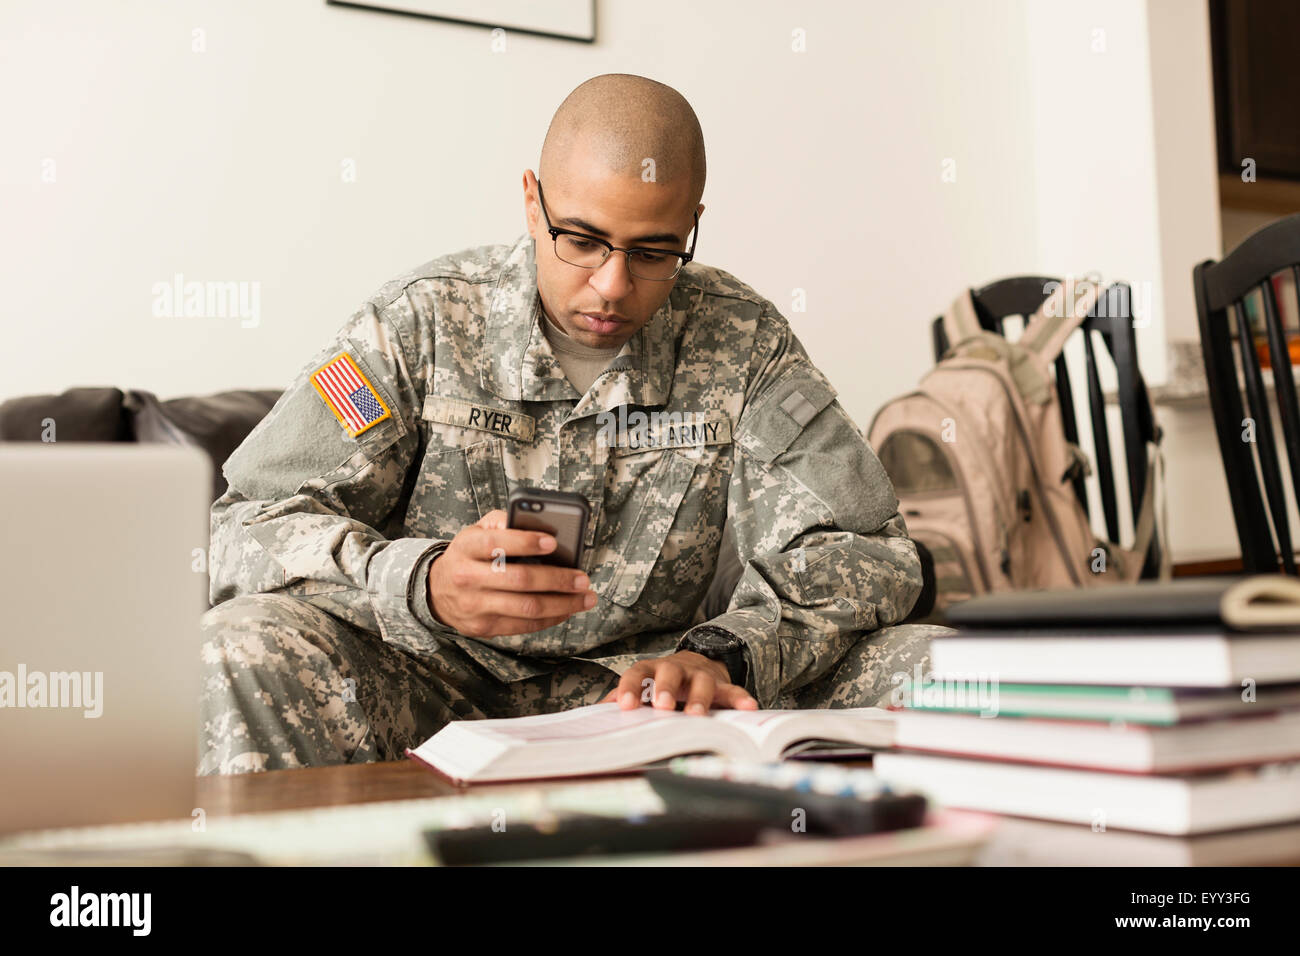 Mixed race soldier texting on cell phone and studying on sofa Stock Photo